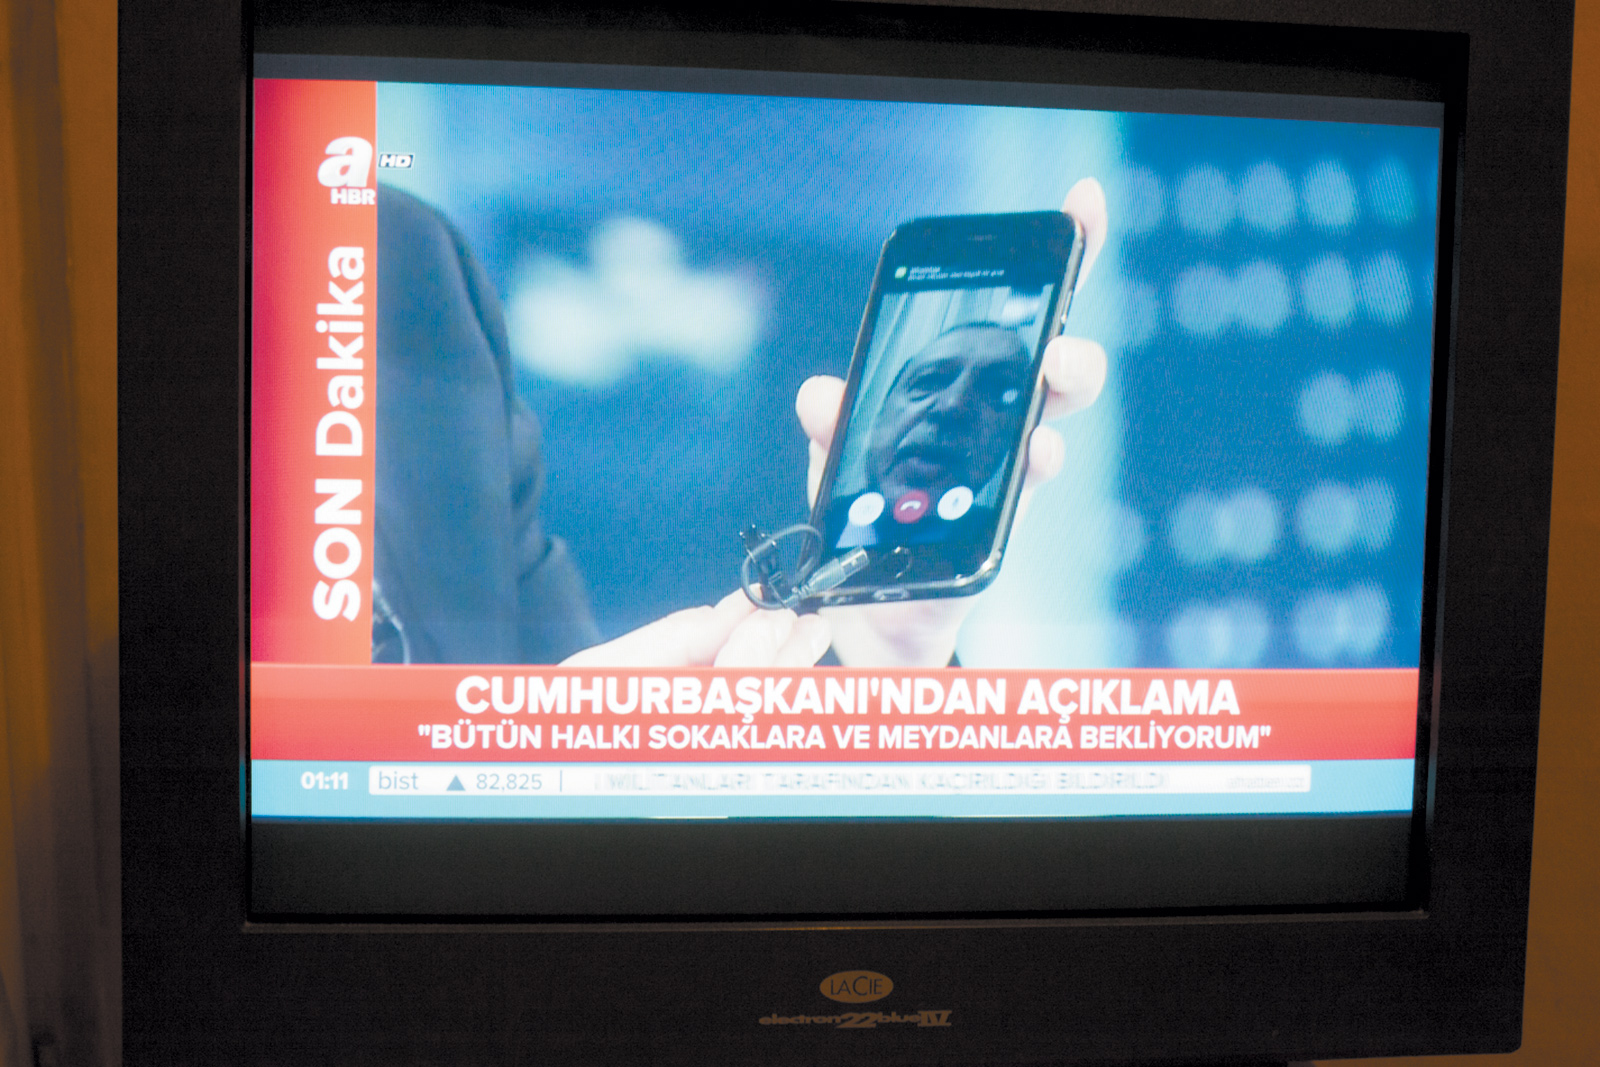 President Erdoğan ‘calling everyone to the streets and city squares’ in a televised appeal to the Turkish public via a smartphone during the attempted coup, July 2016